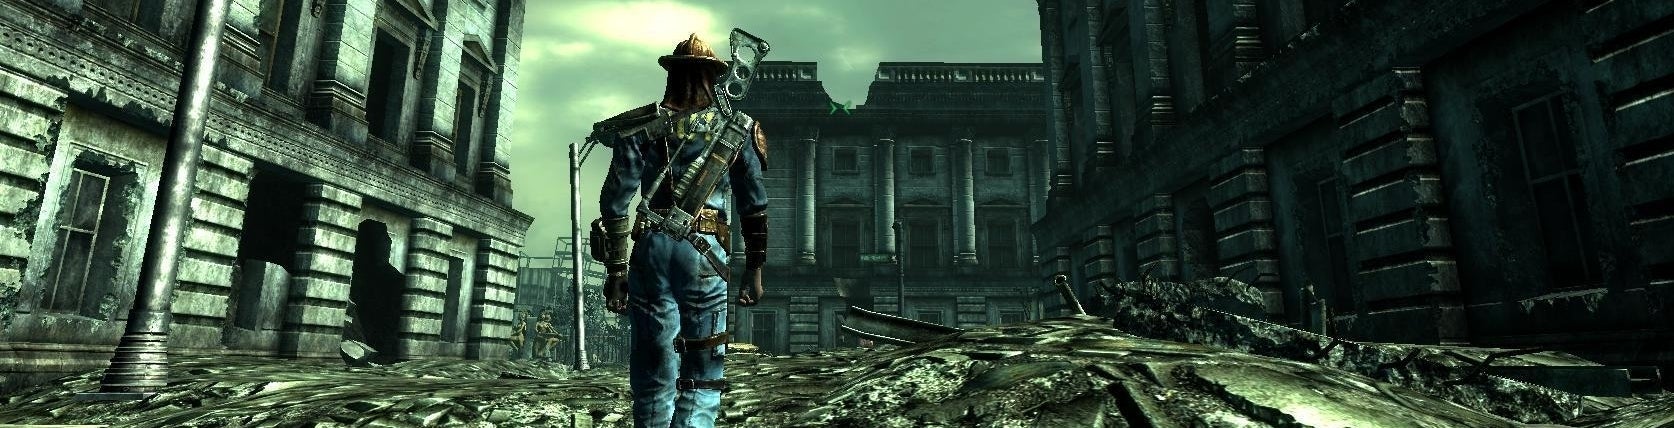 Image for Games of the Generation: Fallout 3